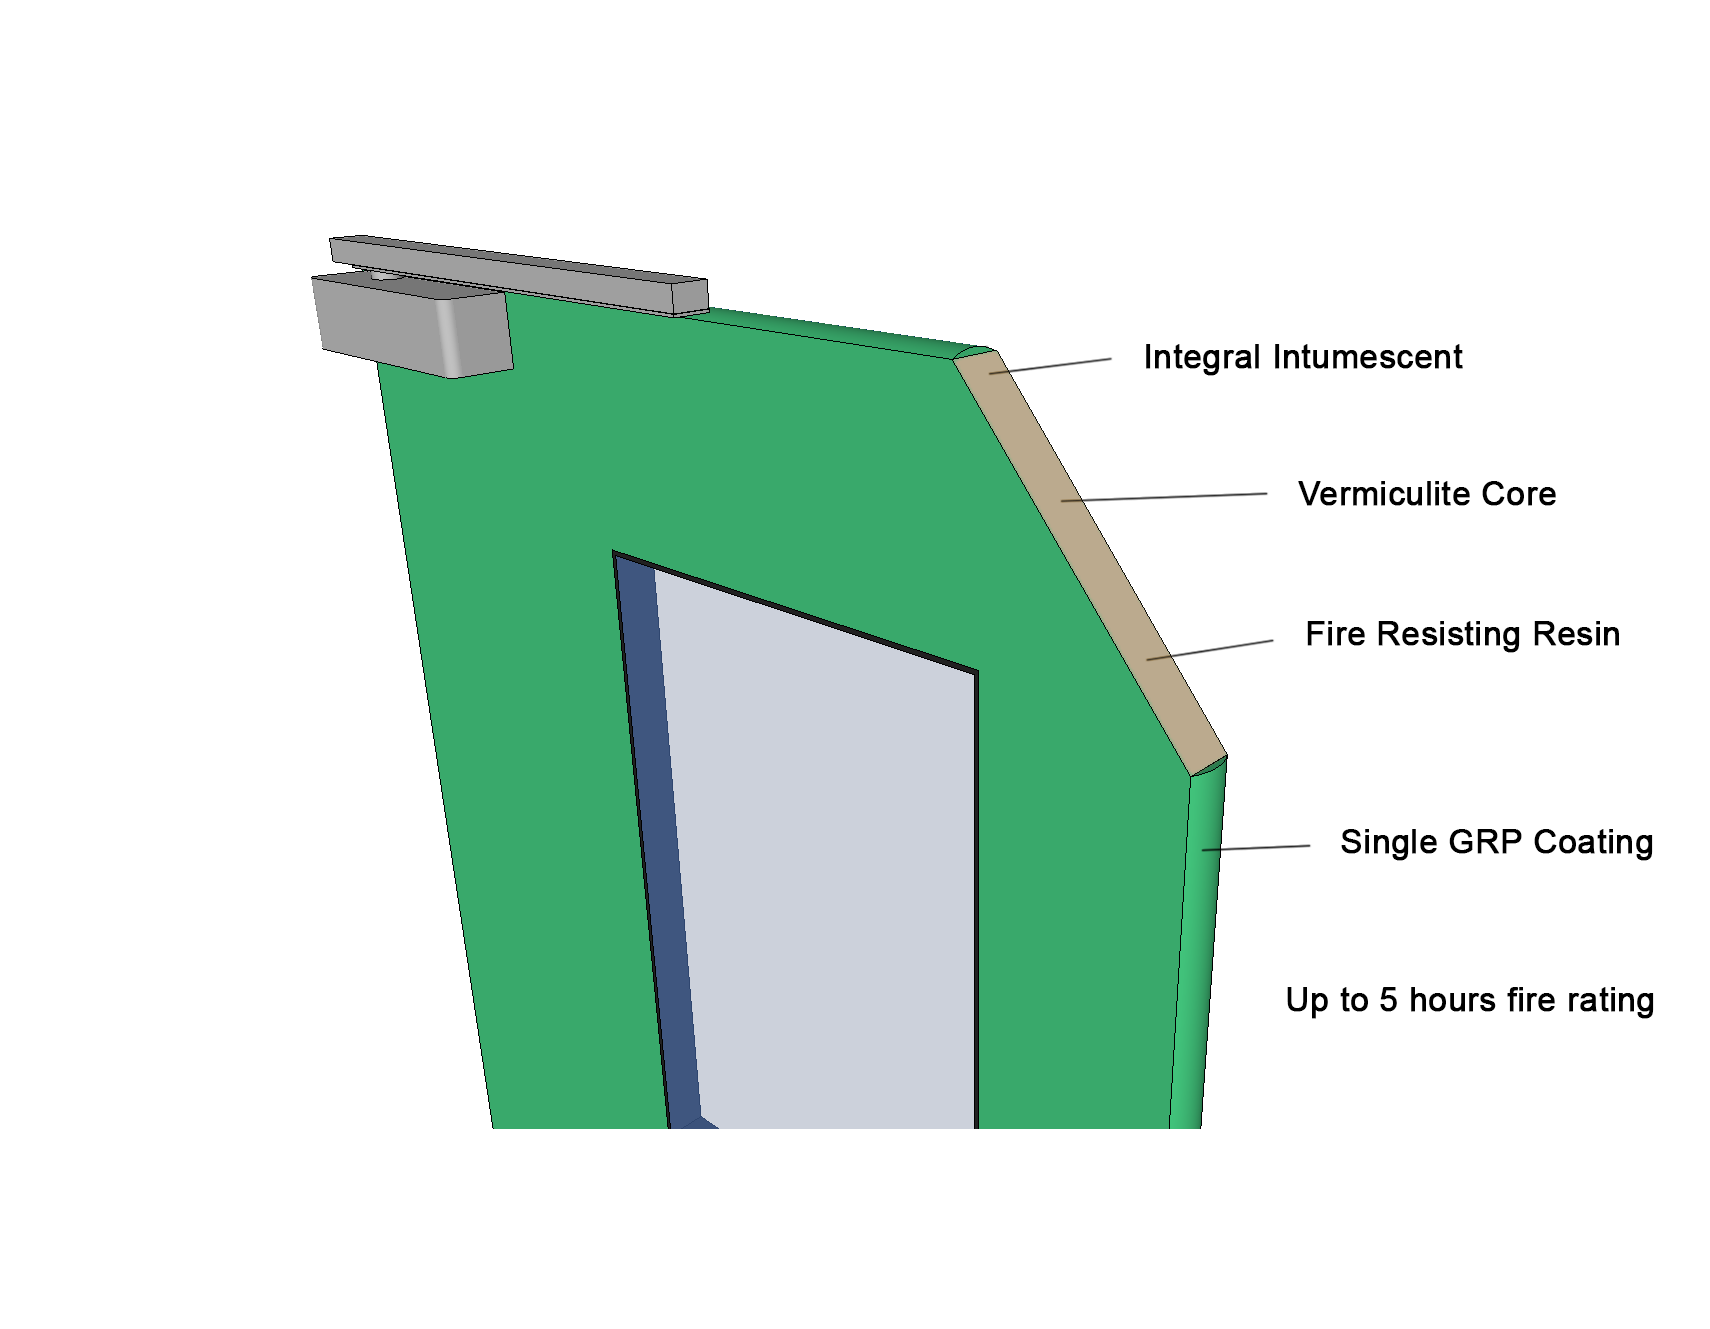 What’s the difference between Composite and Dortek GRP vermiculite-cored Fire Doors?